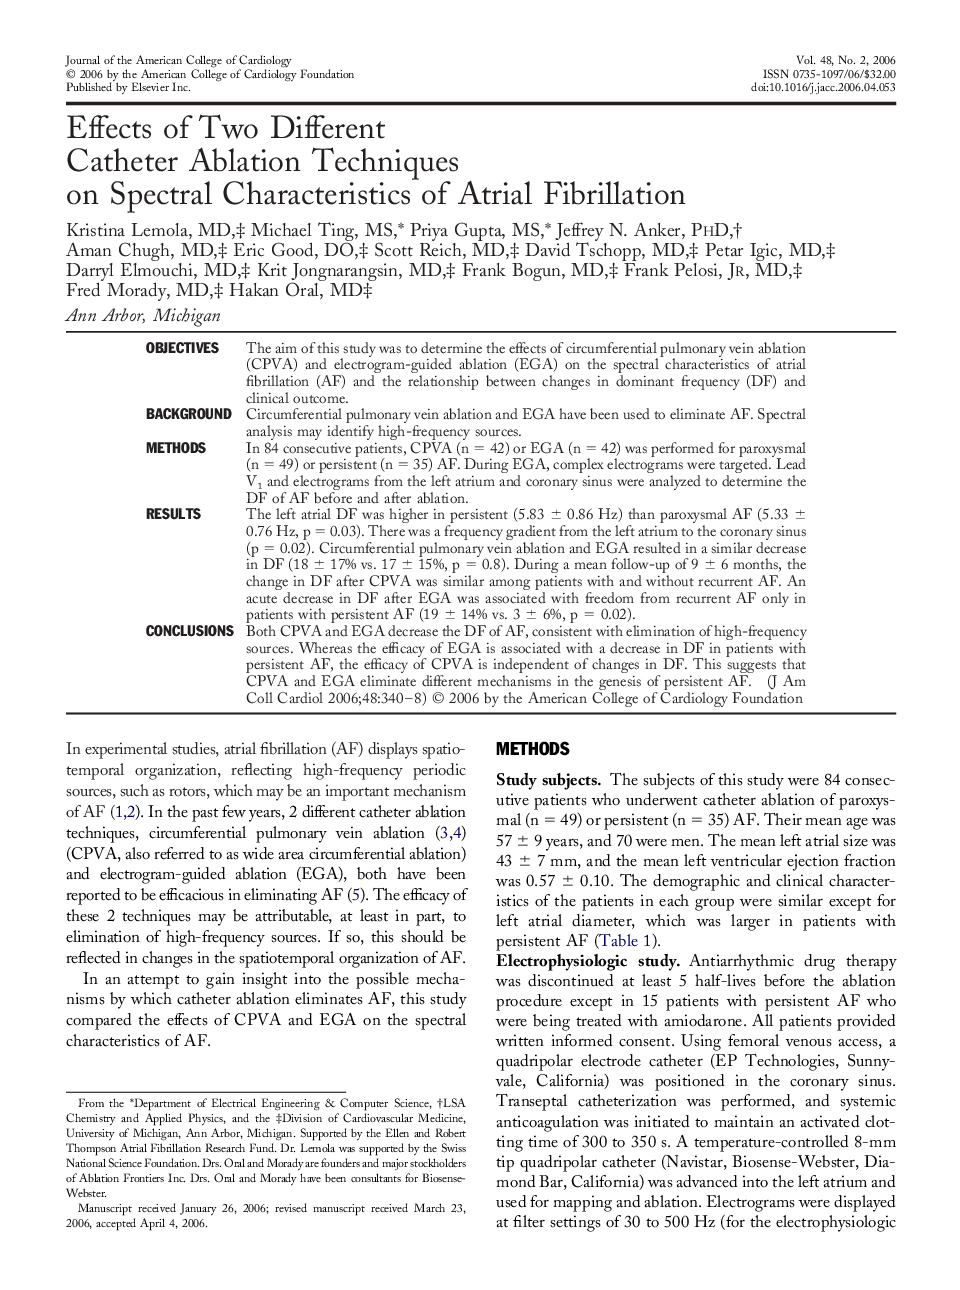 Effects of Two Different Catheter Ablation Techniques on Spectral Characteristics of Atrial Fibrillation 